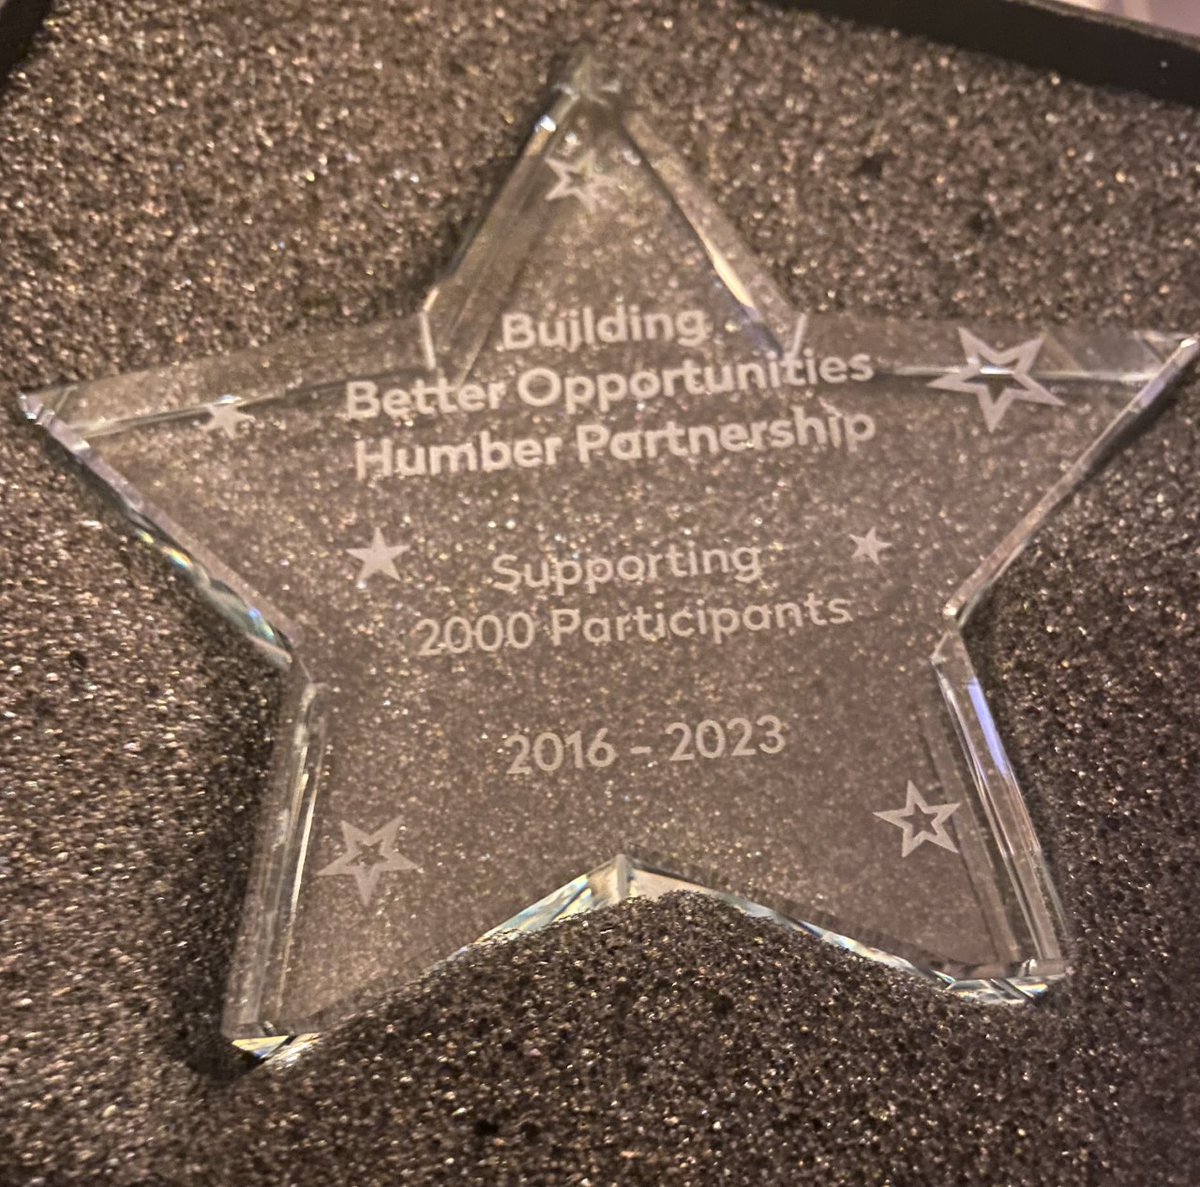 We had a great day at our BBO Humber Partnership Celebration Event. Fantastic to discuss and hear about the impact and difference we have all made to our participants lives. Thrilled with our achievement of best use of social media promotion, certificate🏆🥳.